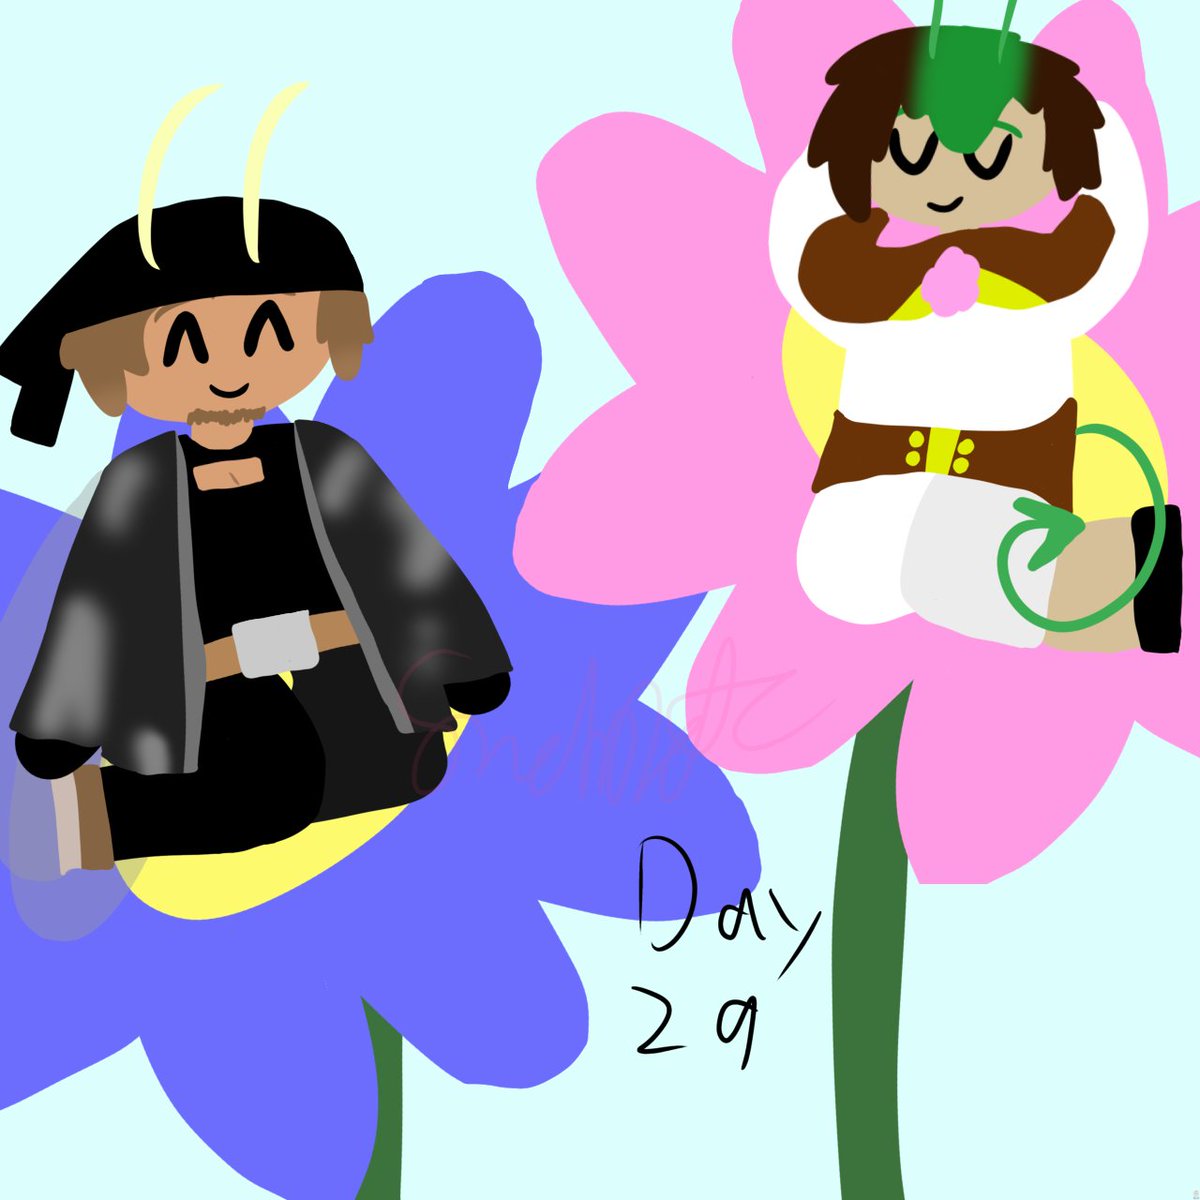 Hermit a day may but I draw every hermit with Joel because I’m drawing Joel everyday anyway day 29
Hypno!
They’re both just really bug coded :)
#hermitaday #hermitadaymay